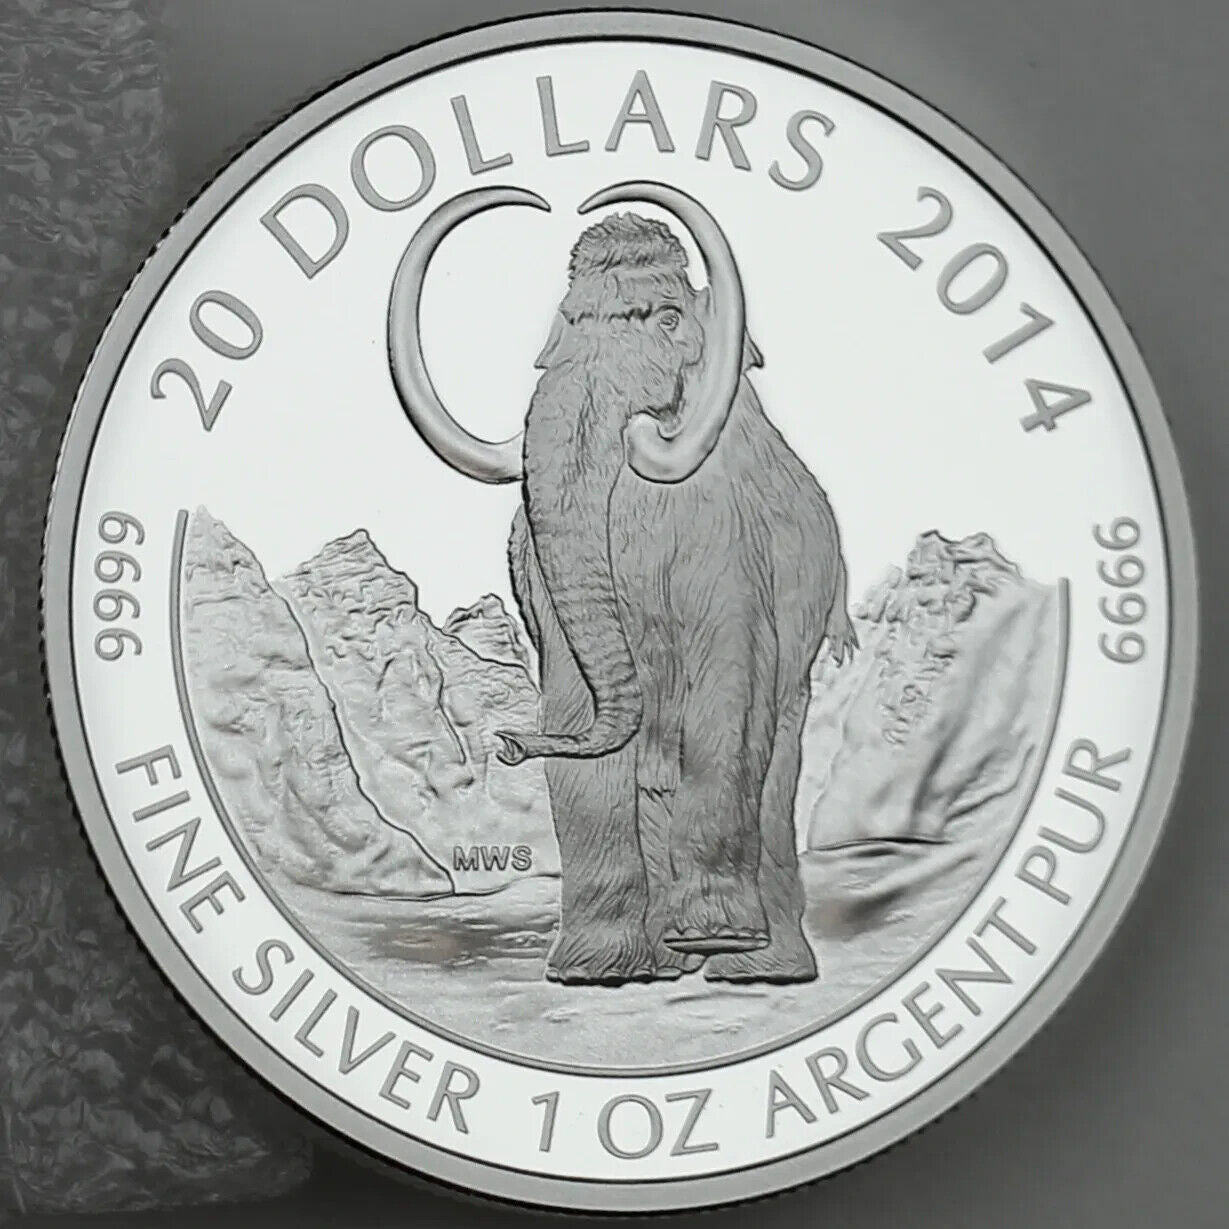 1 Oz Silver Coin 2014 $20 Proof Prehistoric Animals: The Woolly Mammoth-classypw.com-2